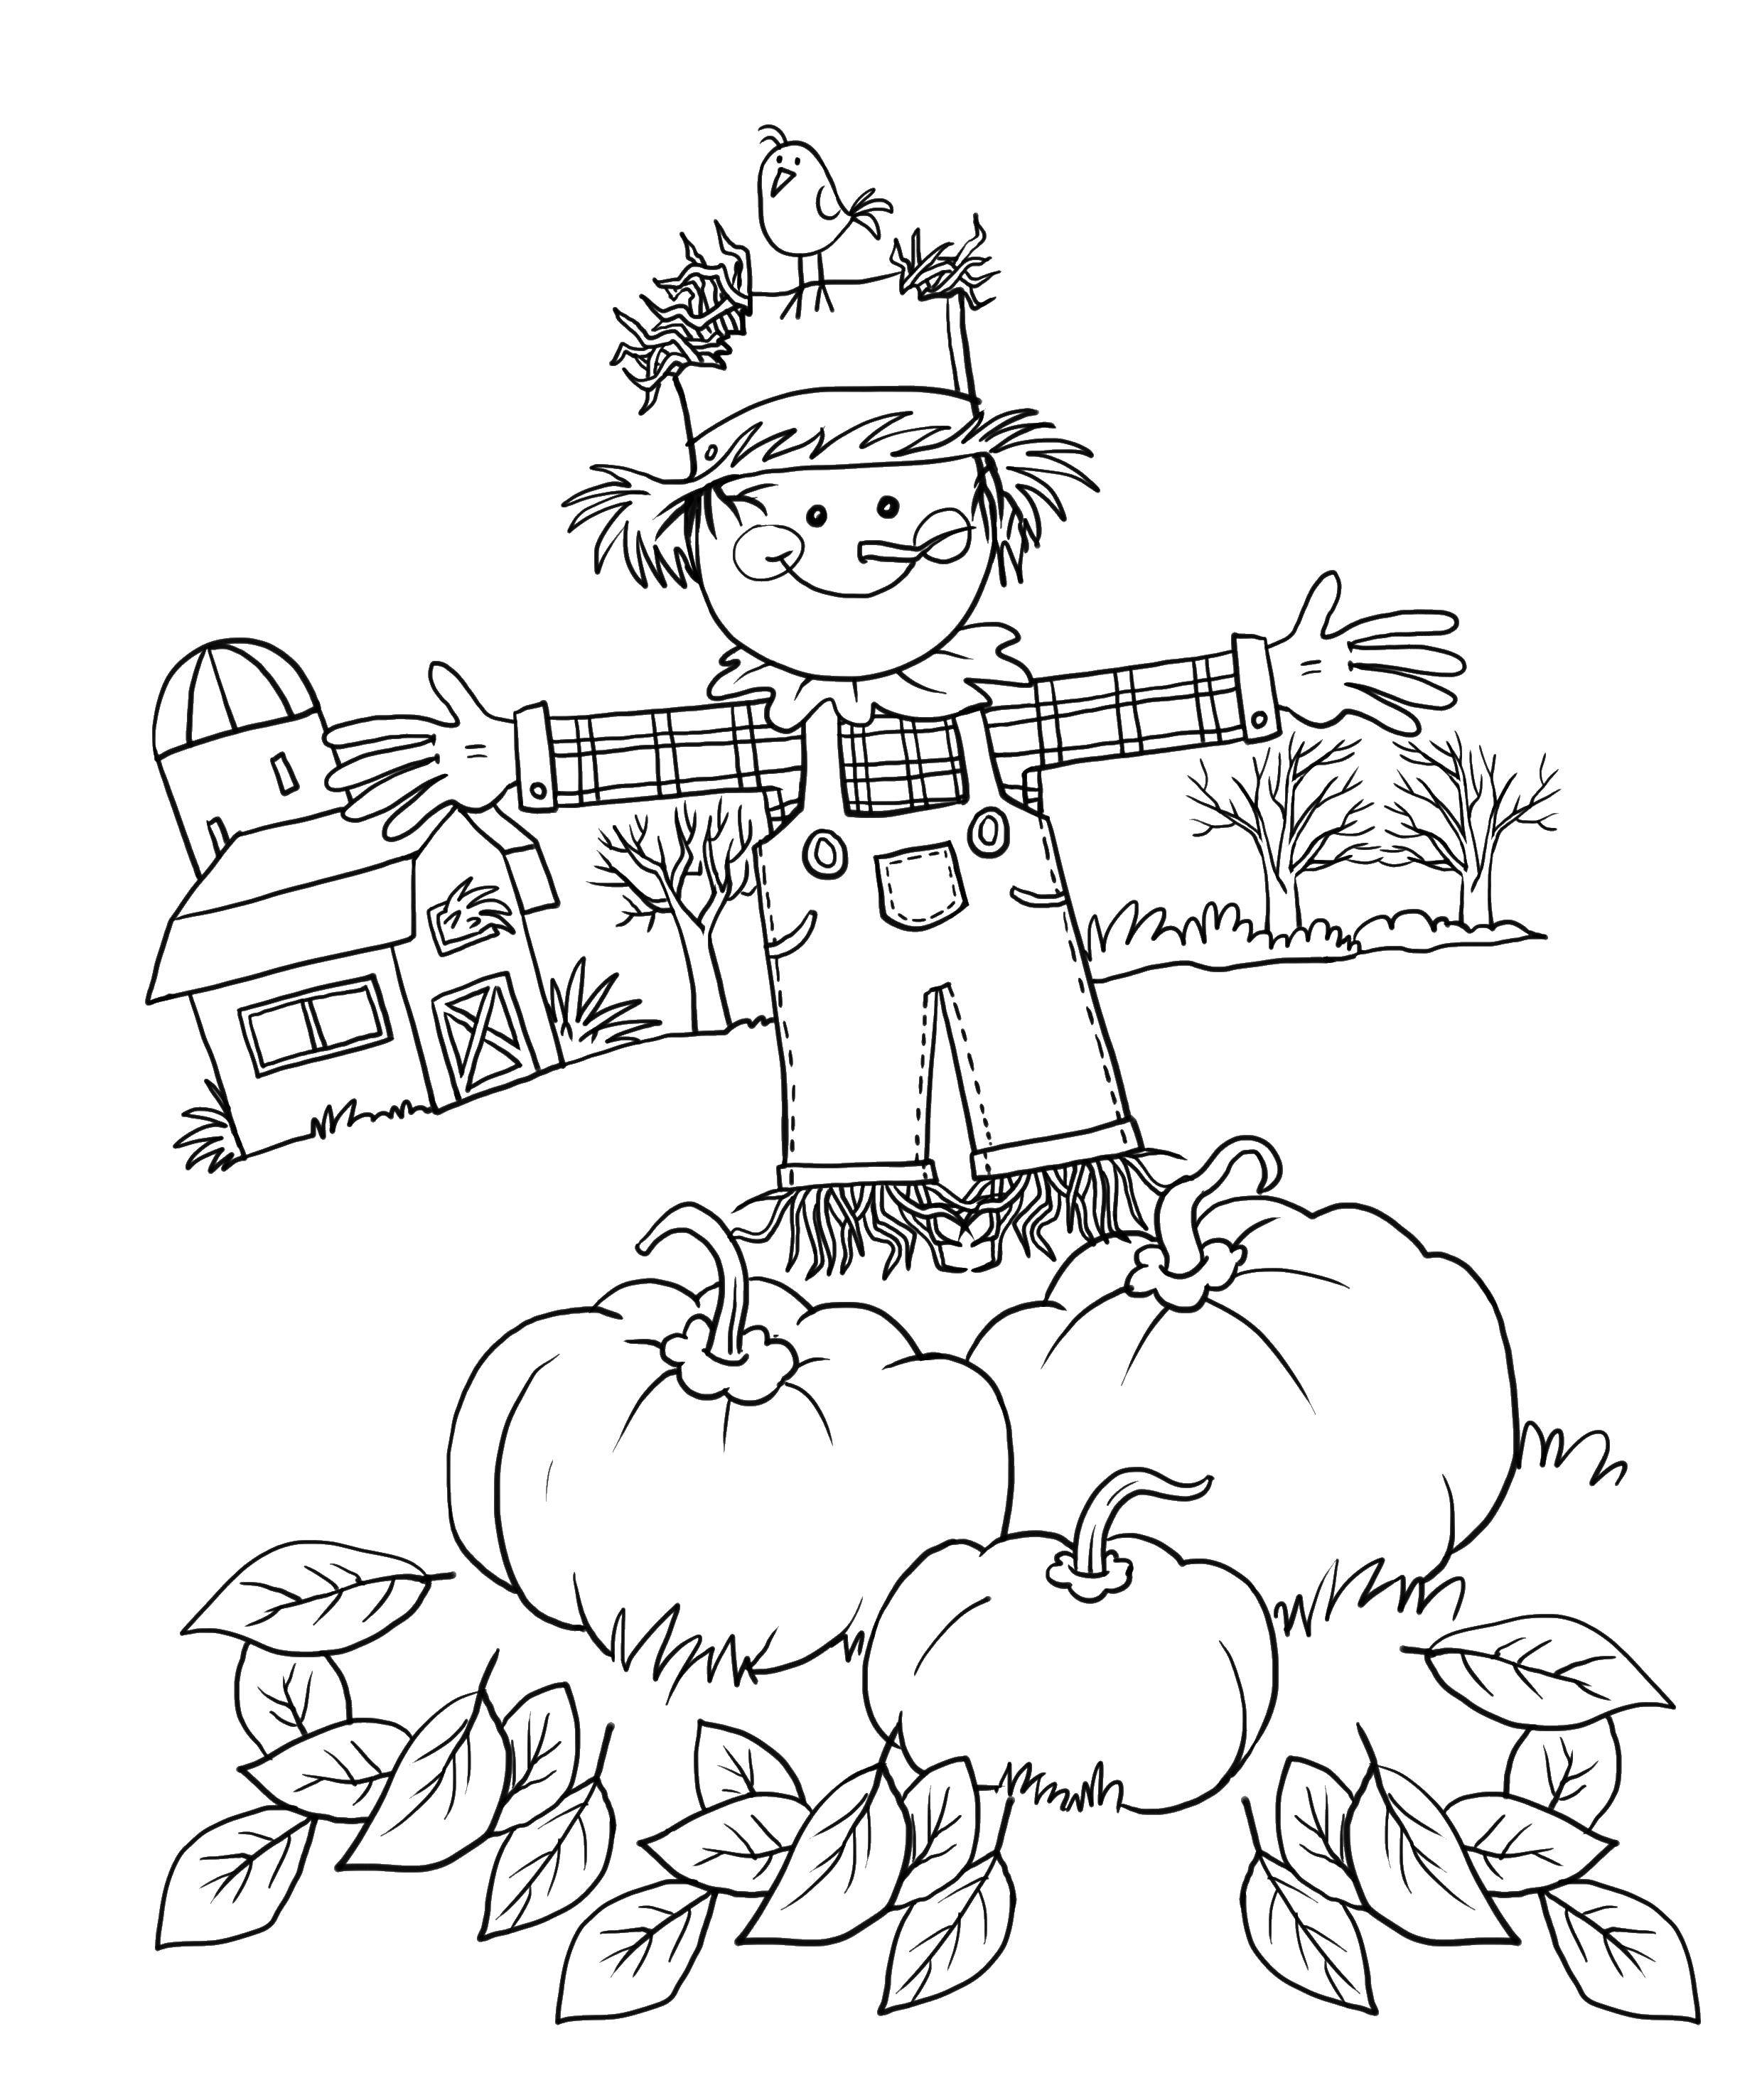 Coloring Scarecrow in the garden. Category Autumn leaves falling. Tags:  Scarecrow, pumpkin, leaves, bird.